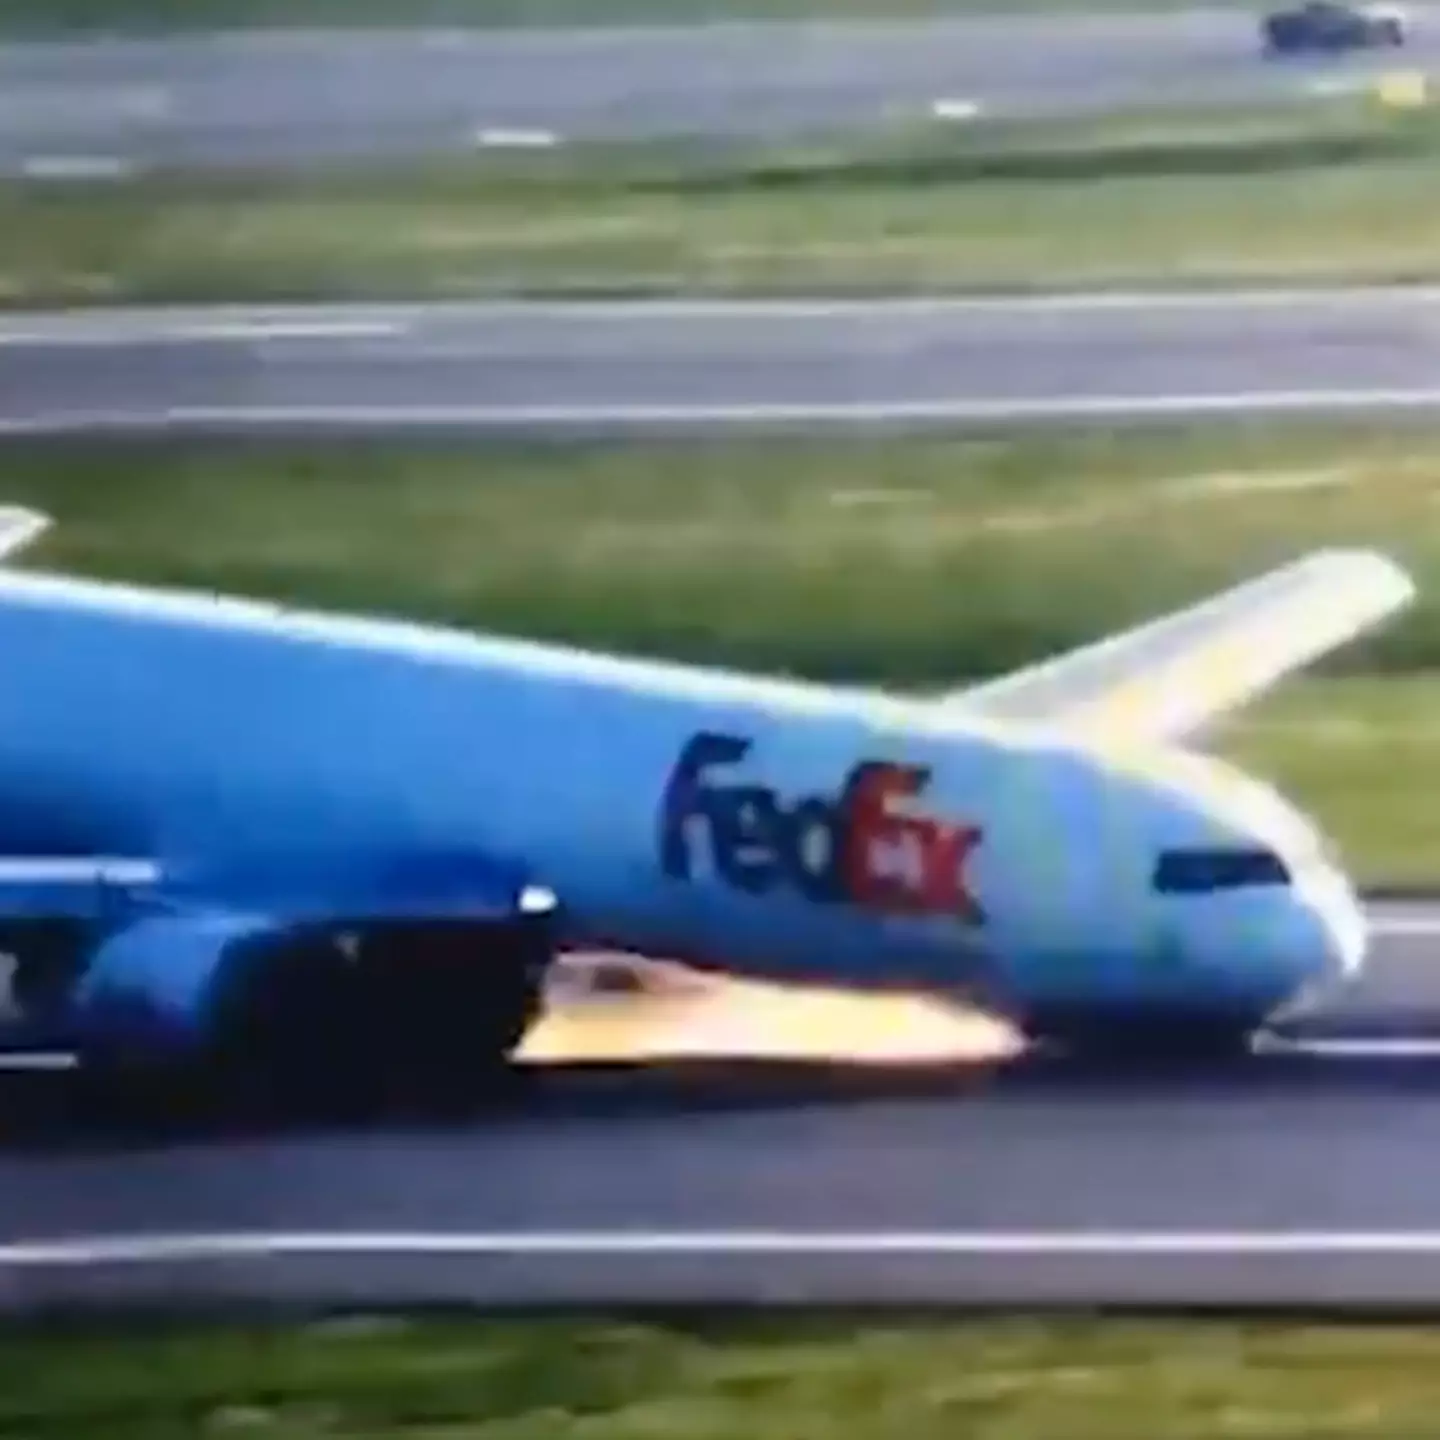 Terrifying moment Boeing 767 plane is forced to make emergency landing and nosedives onto runway